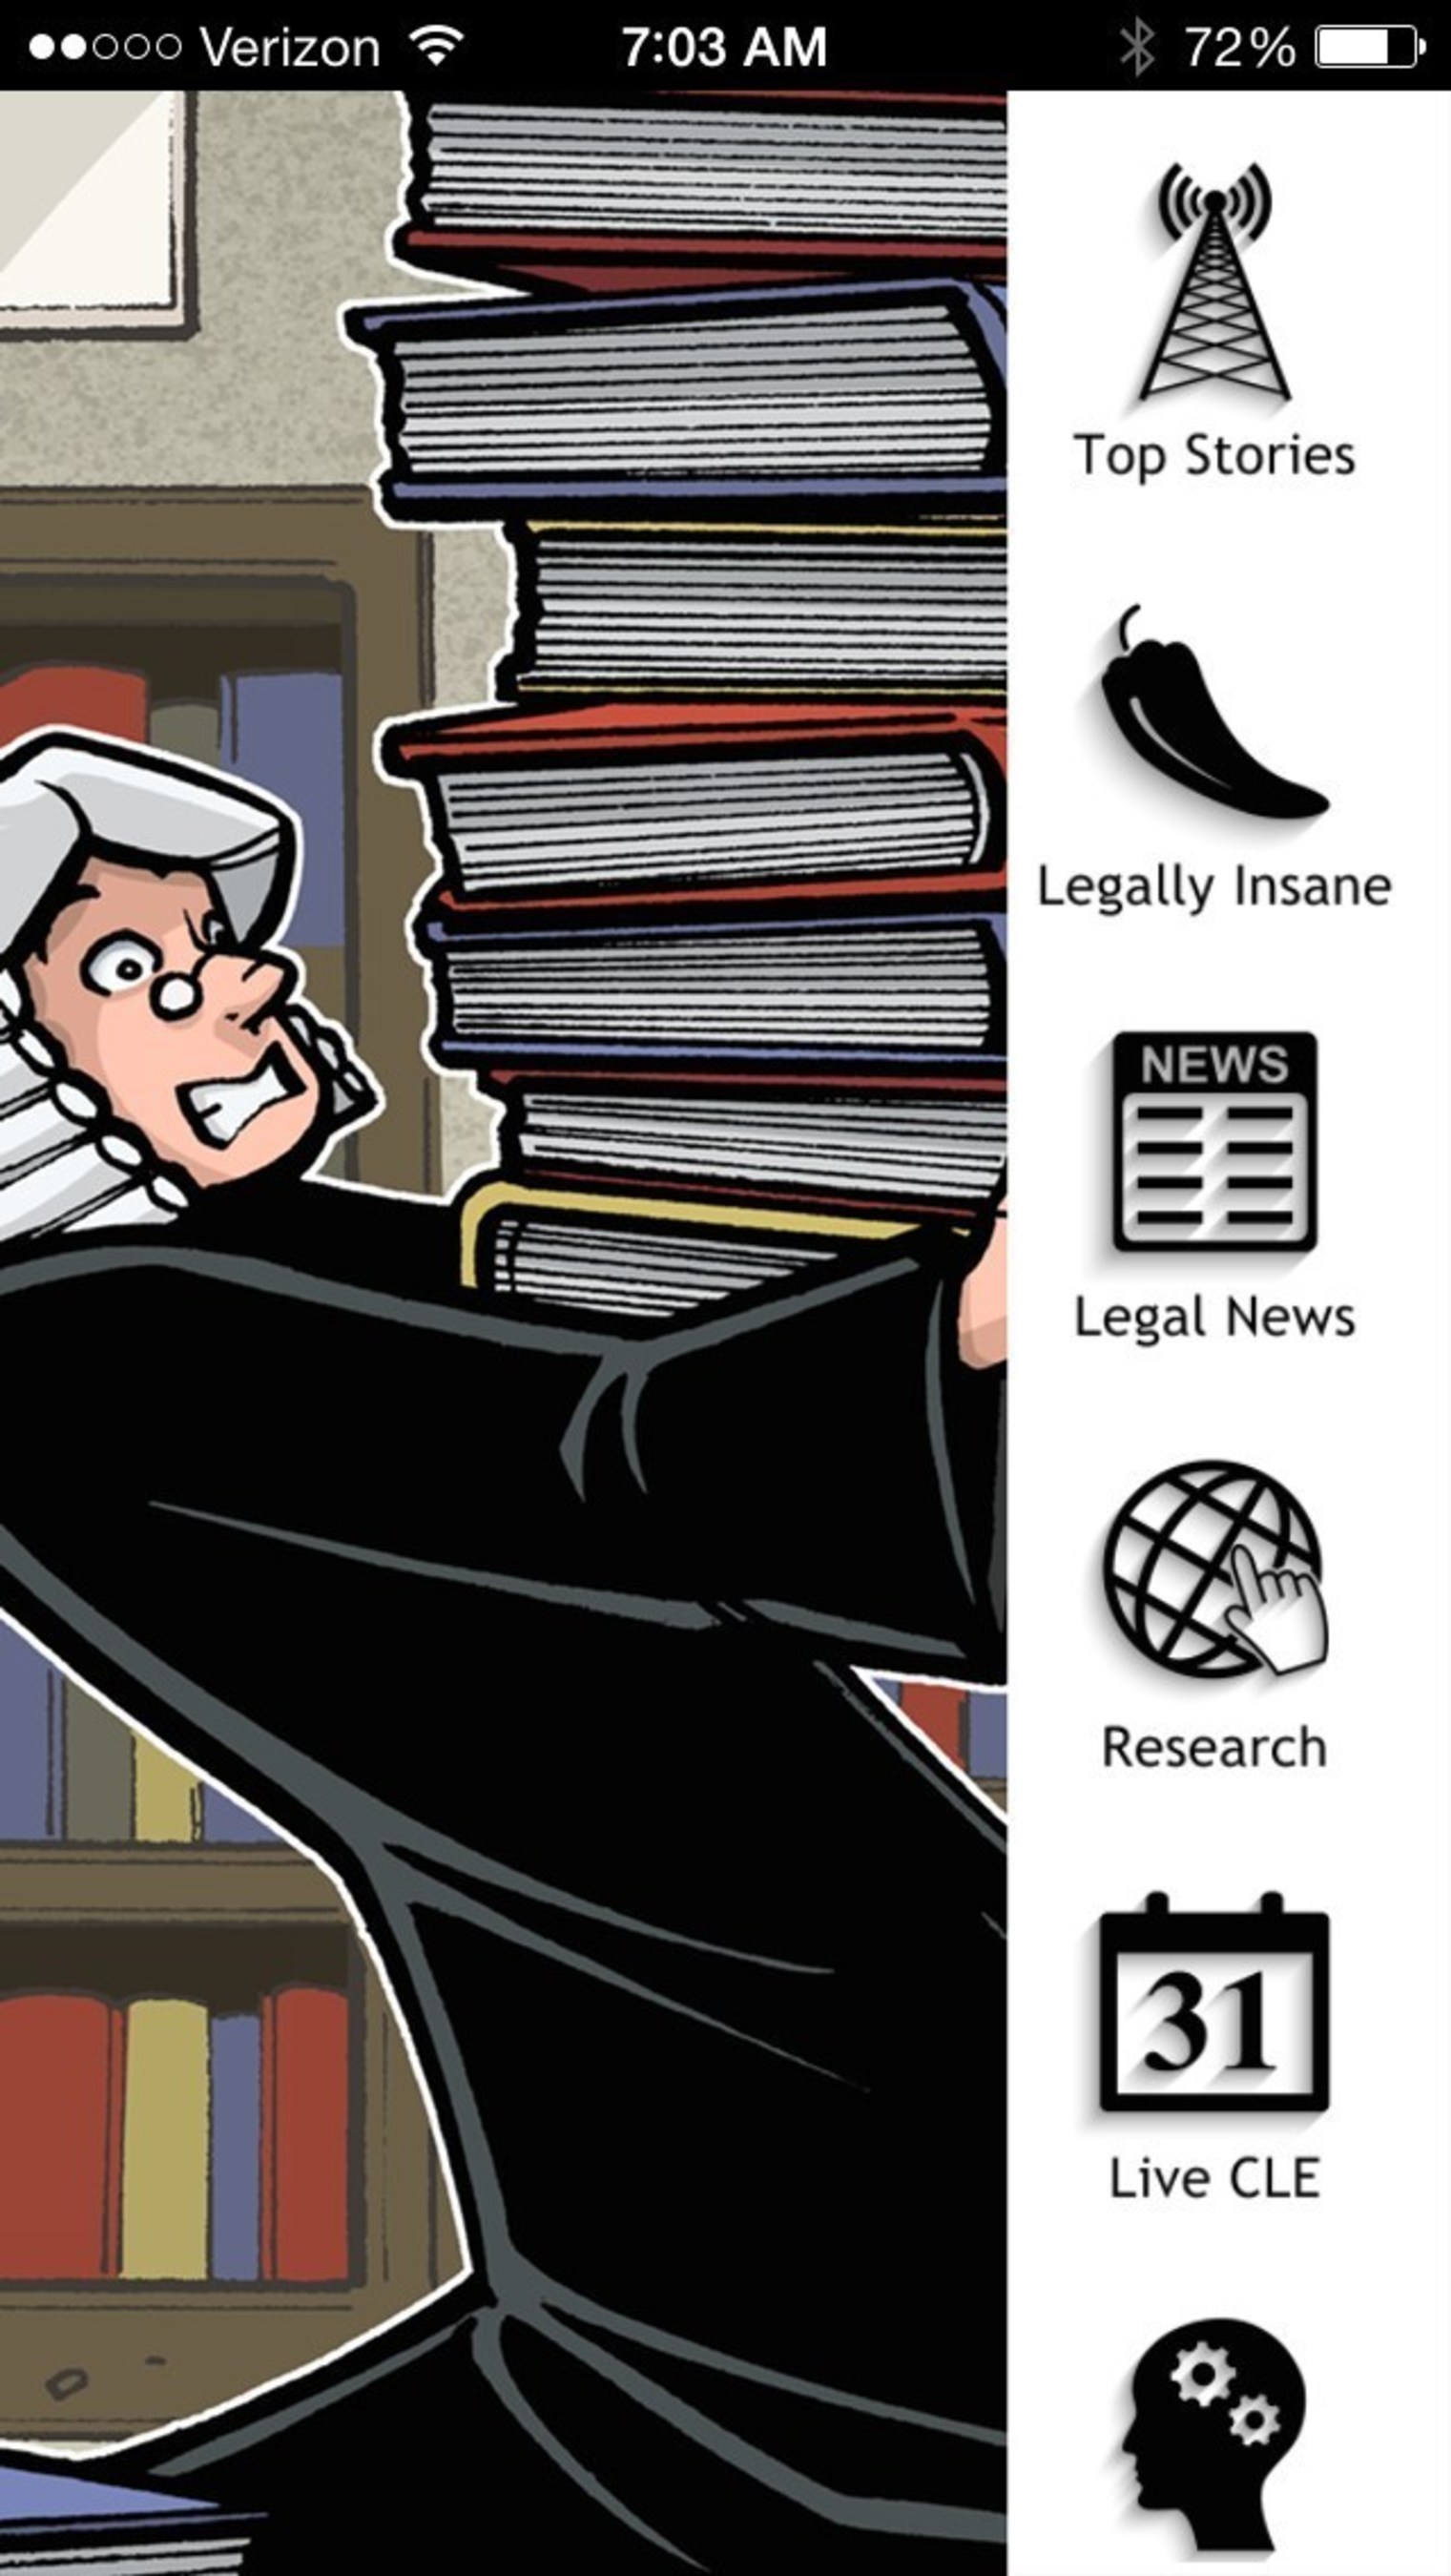 Legal Newsance - iPhone and Android home screen